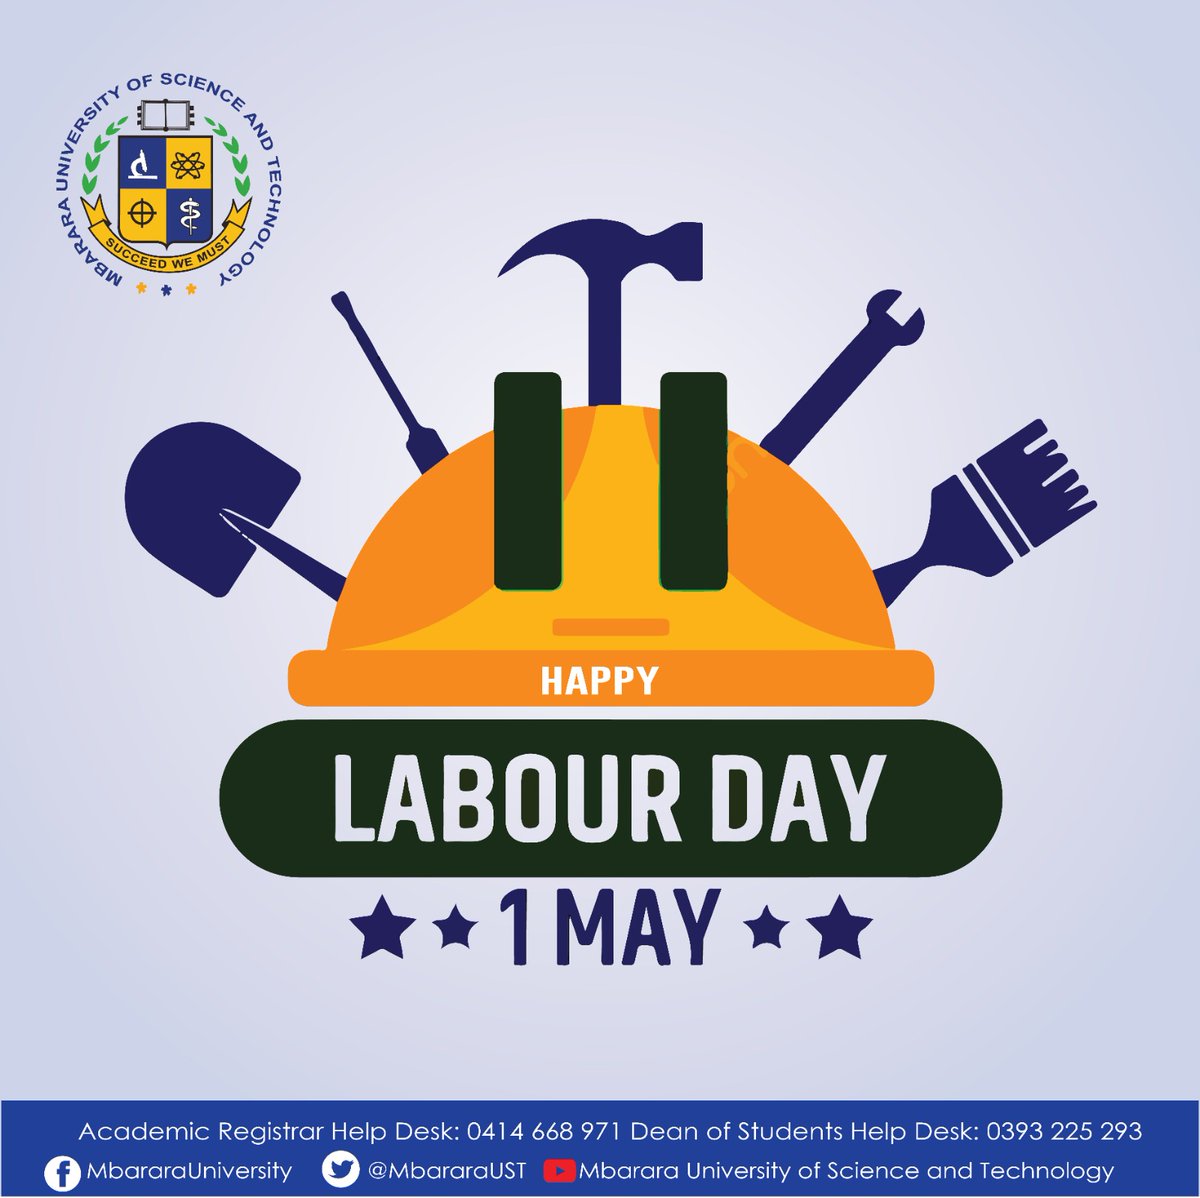 We recognize the contributions of all workers.

#HappyLabourDay